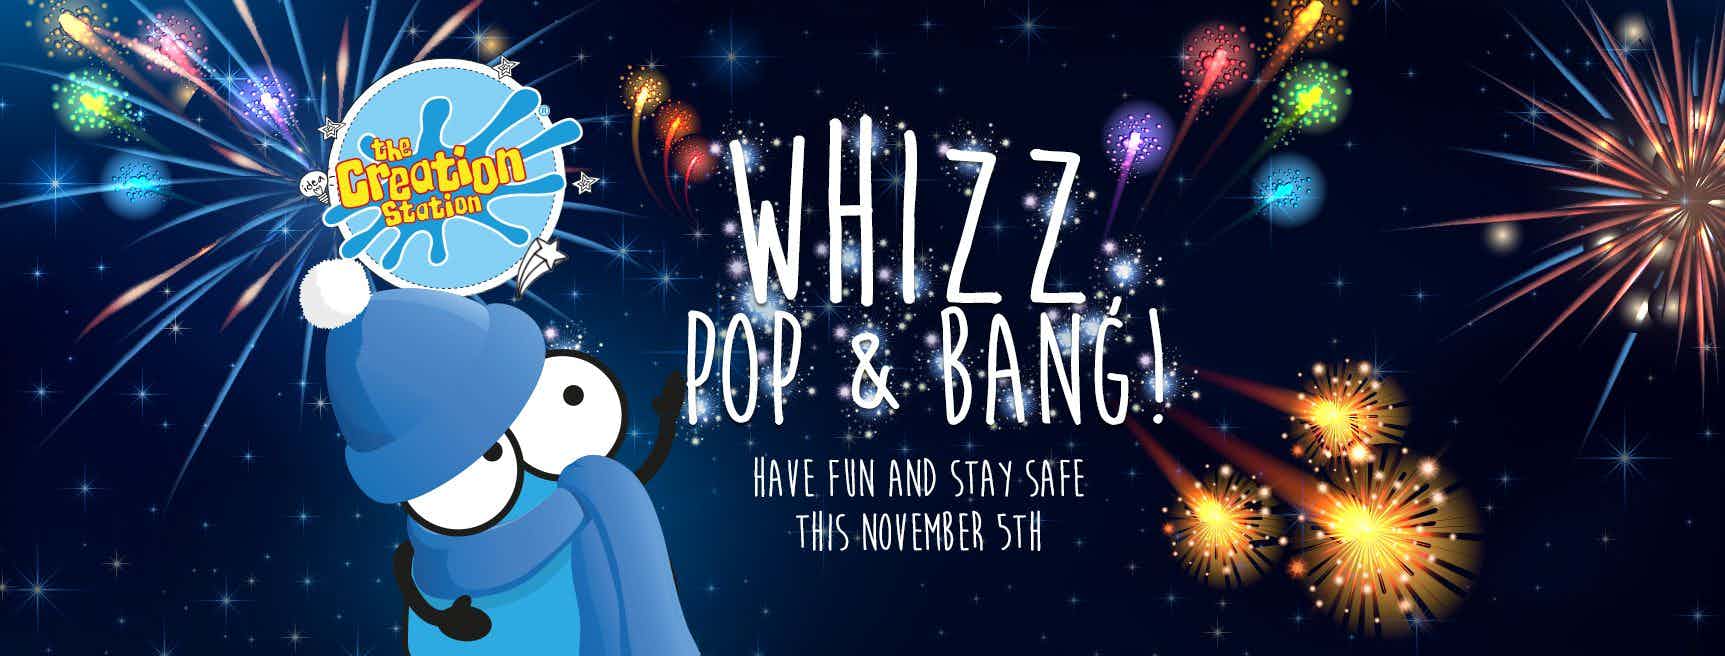 Whizz, Pop & Bang! Have Fun and Stay Safe This November 5th.